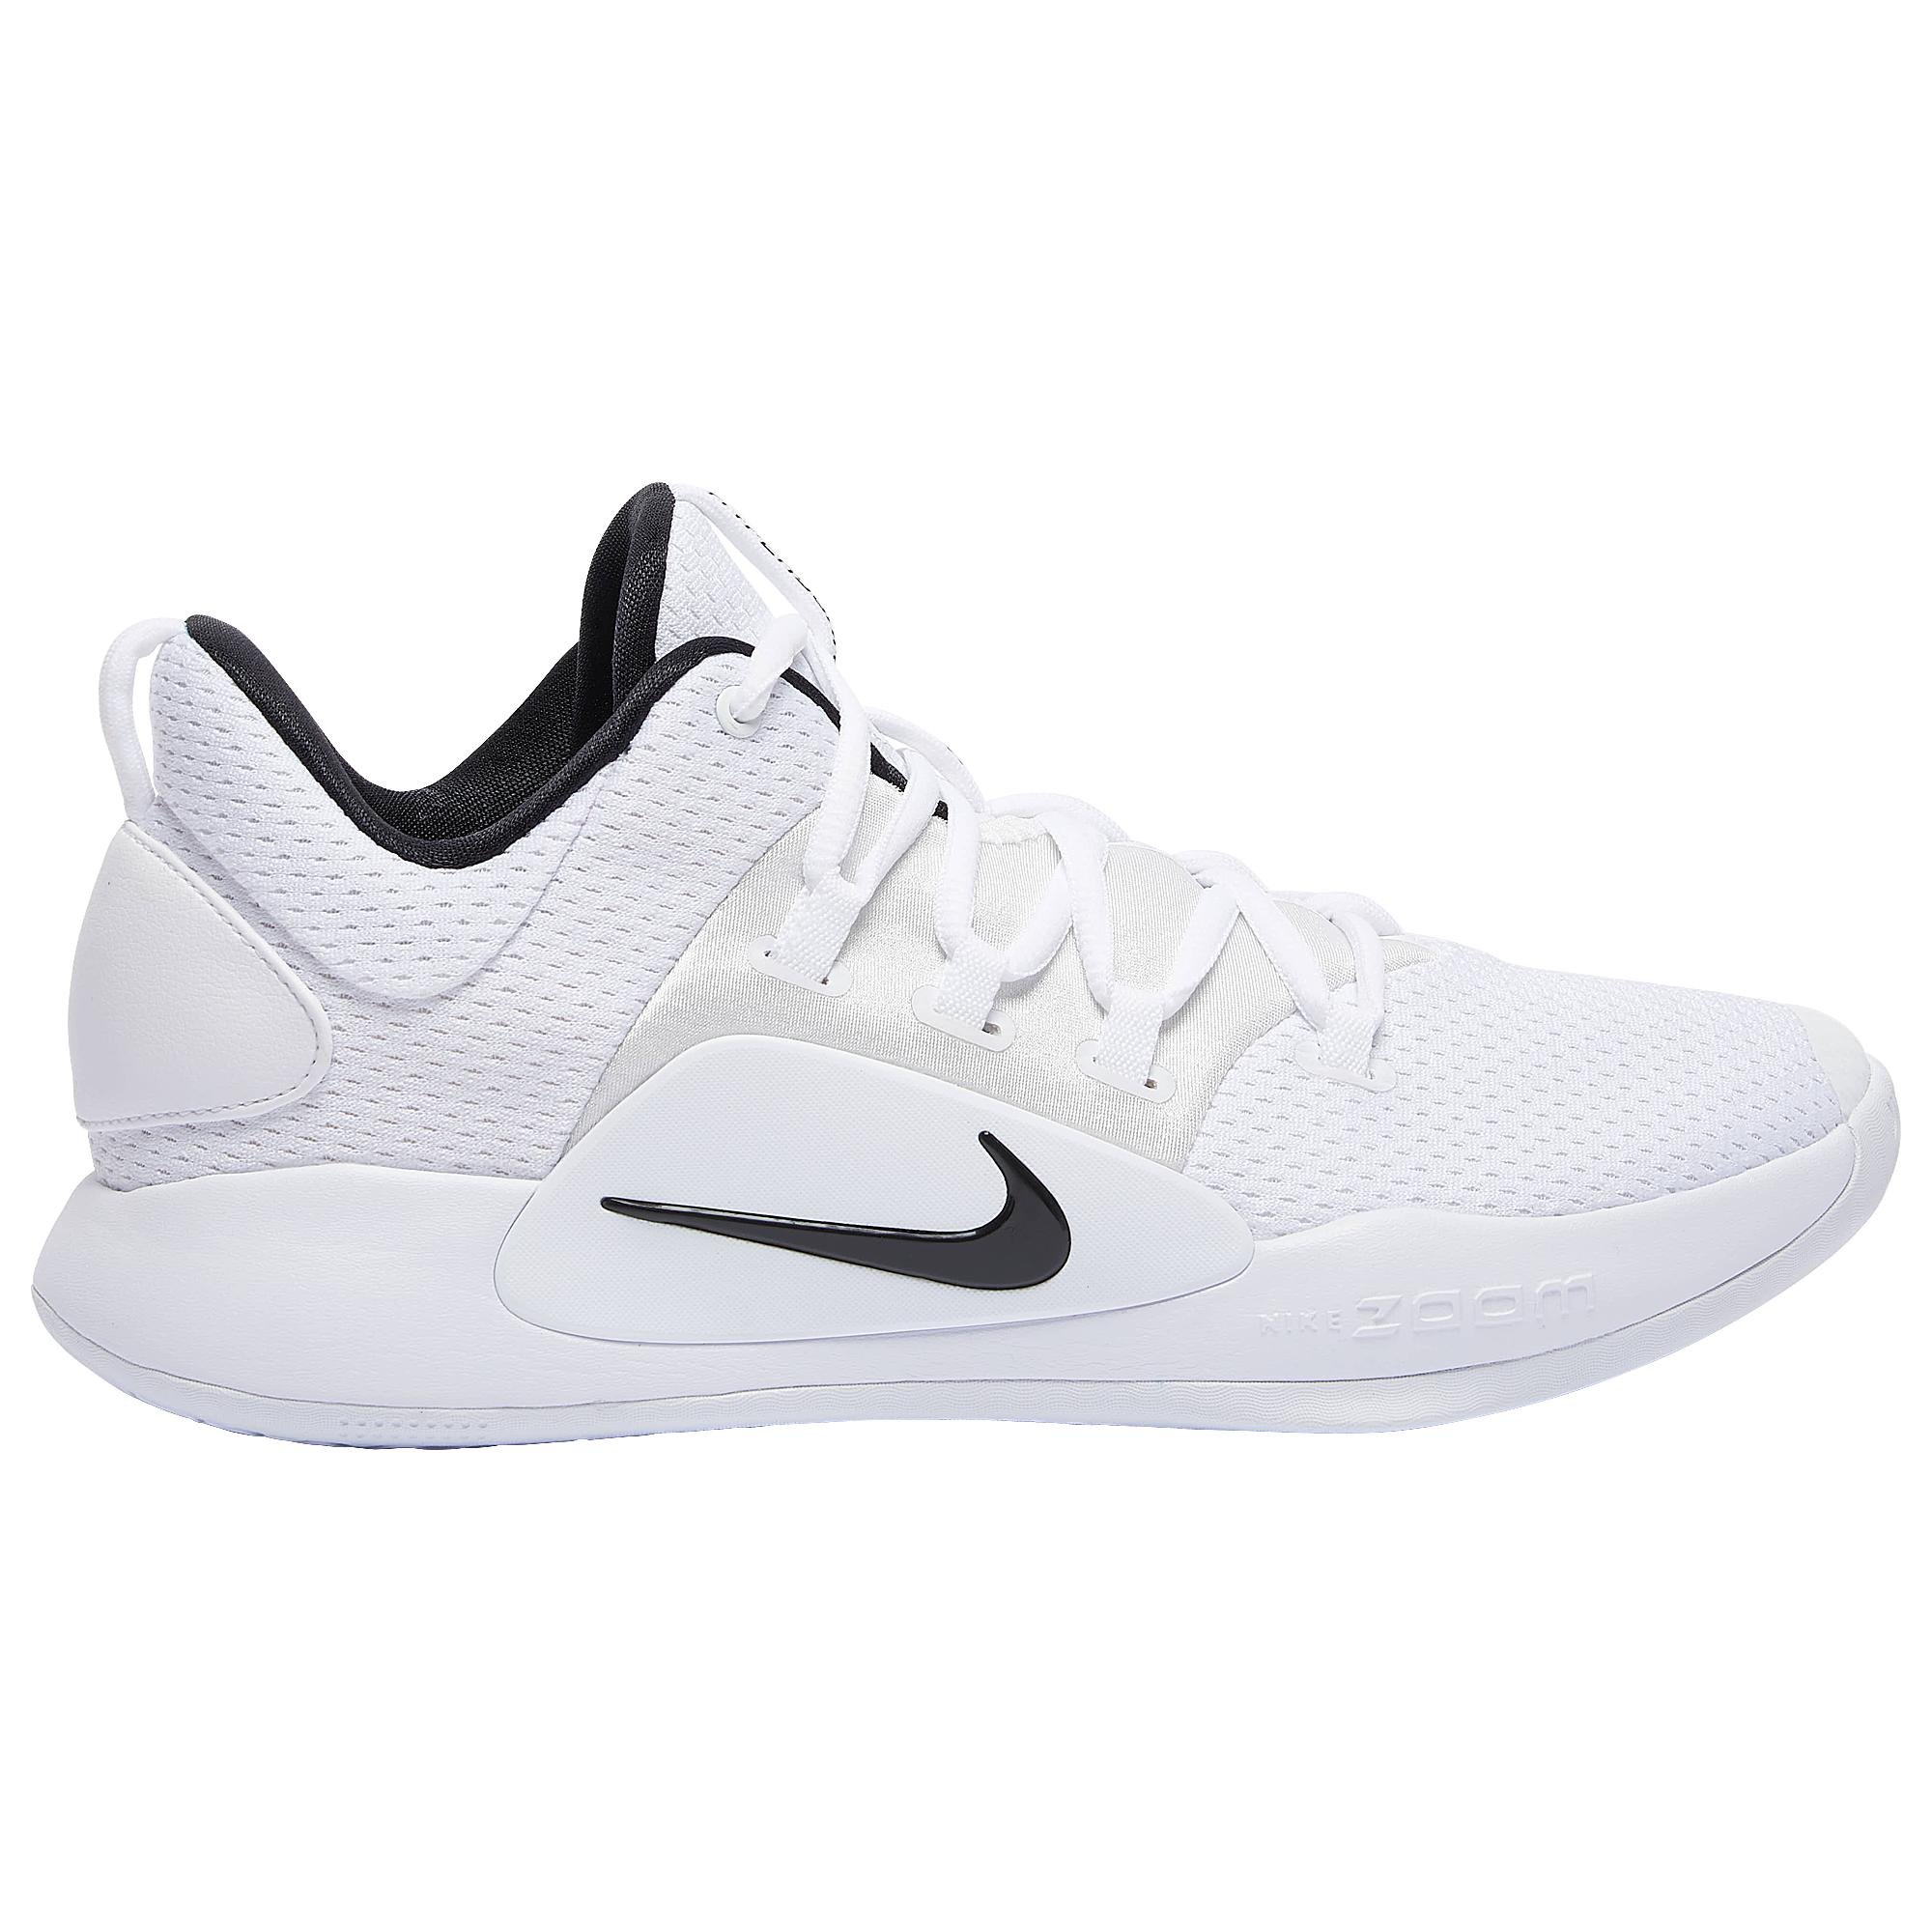 white low top basketball shoes